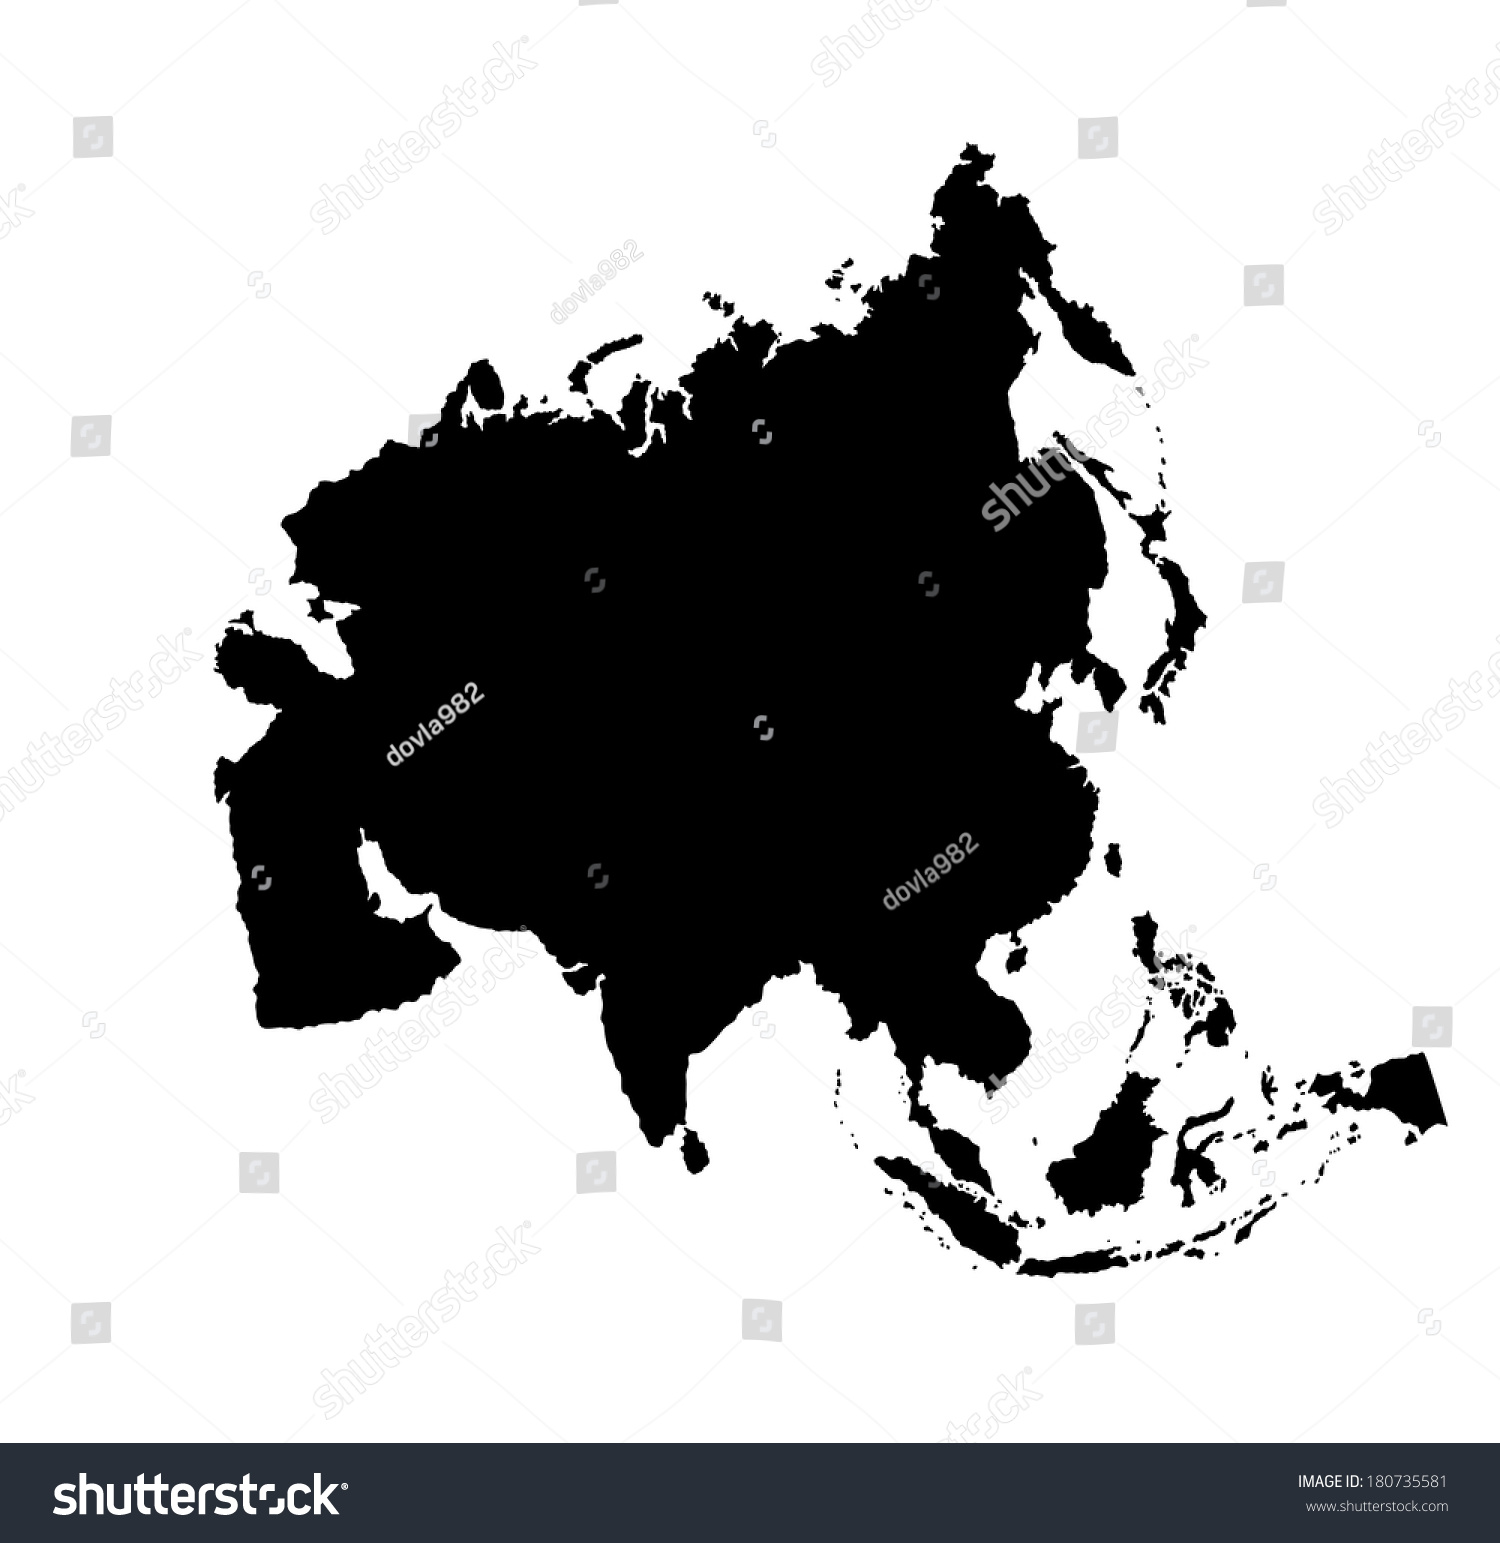 Asia vector map silhouette isolated on white background. #180735581